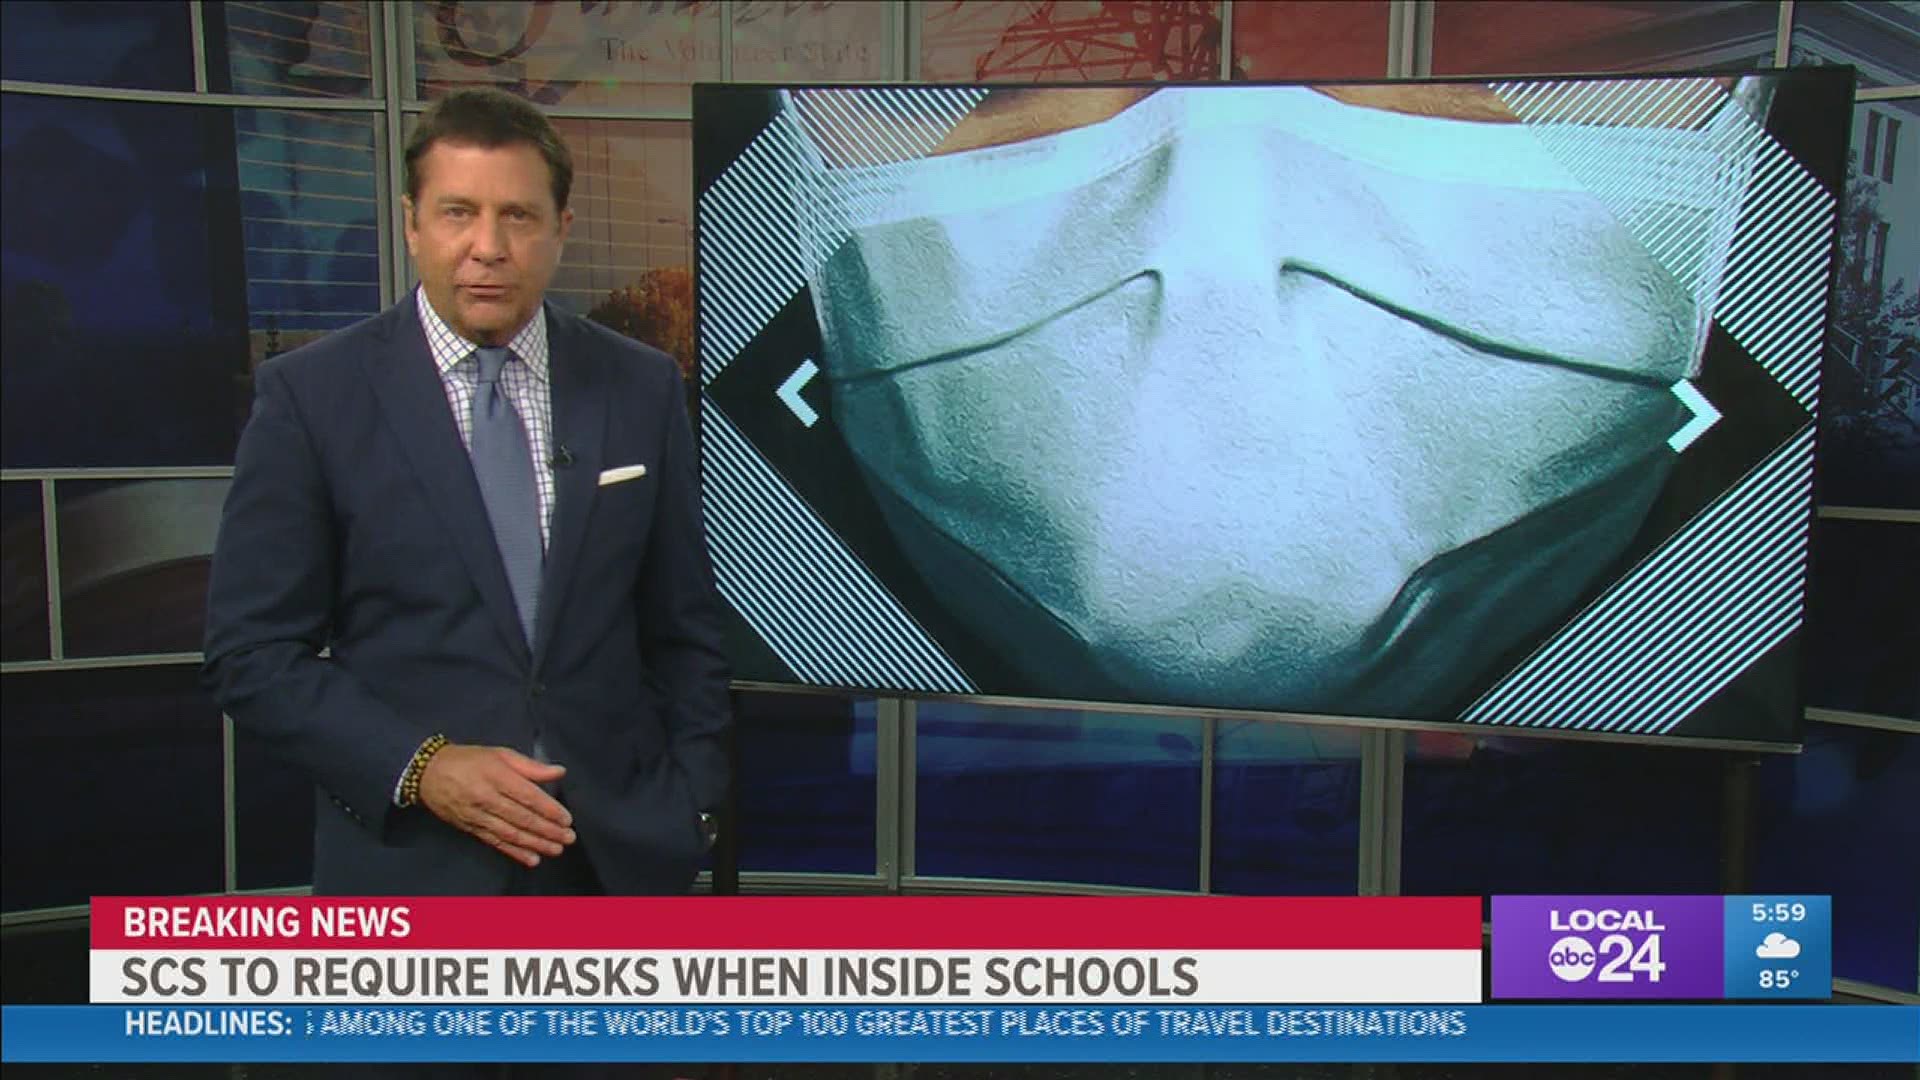 A Shelby County Schools statement said that "masks should be worn indoors...by all employees and students, regardless of vaccination status..."